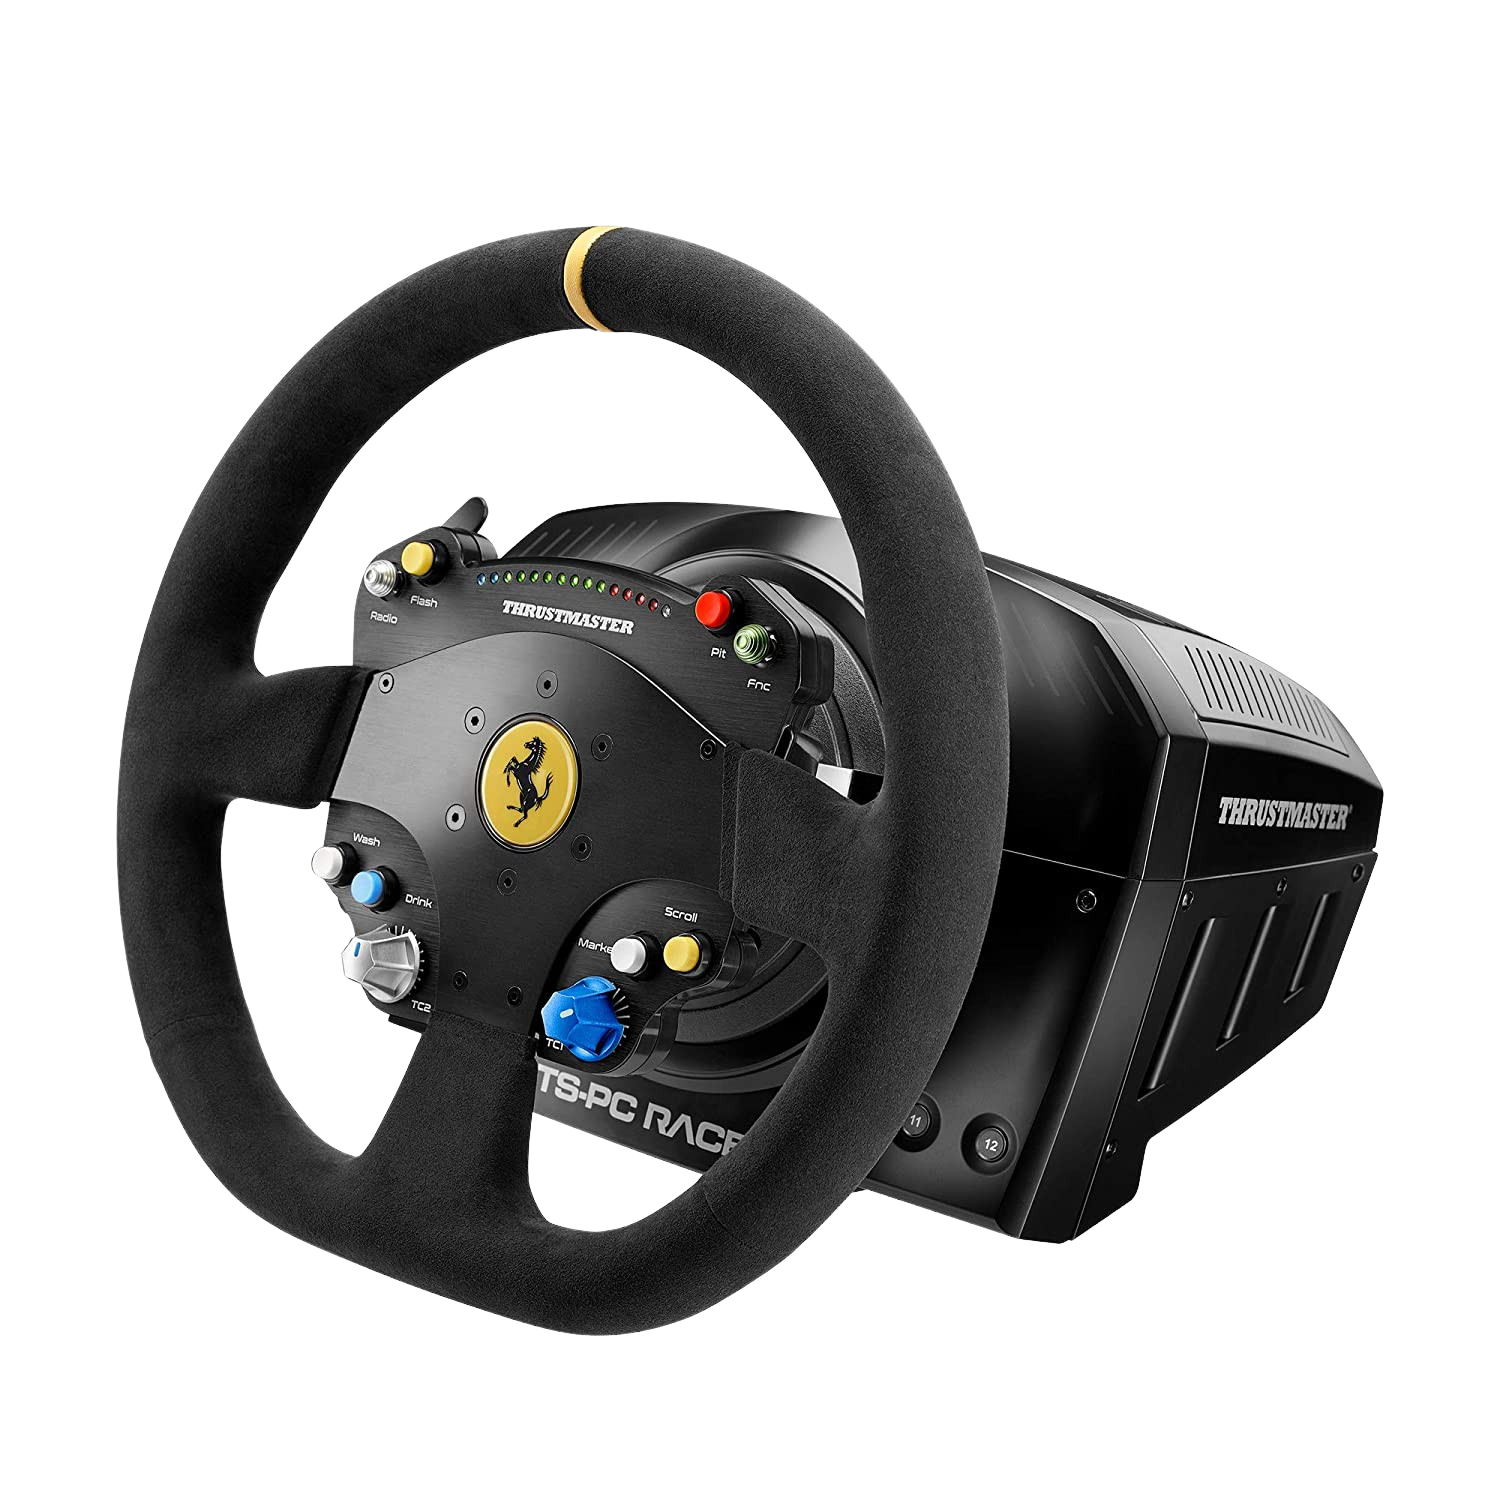 Rent Thrustmaster T150 PRO Racing Steering Wheel from €9.90 per month